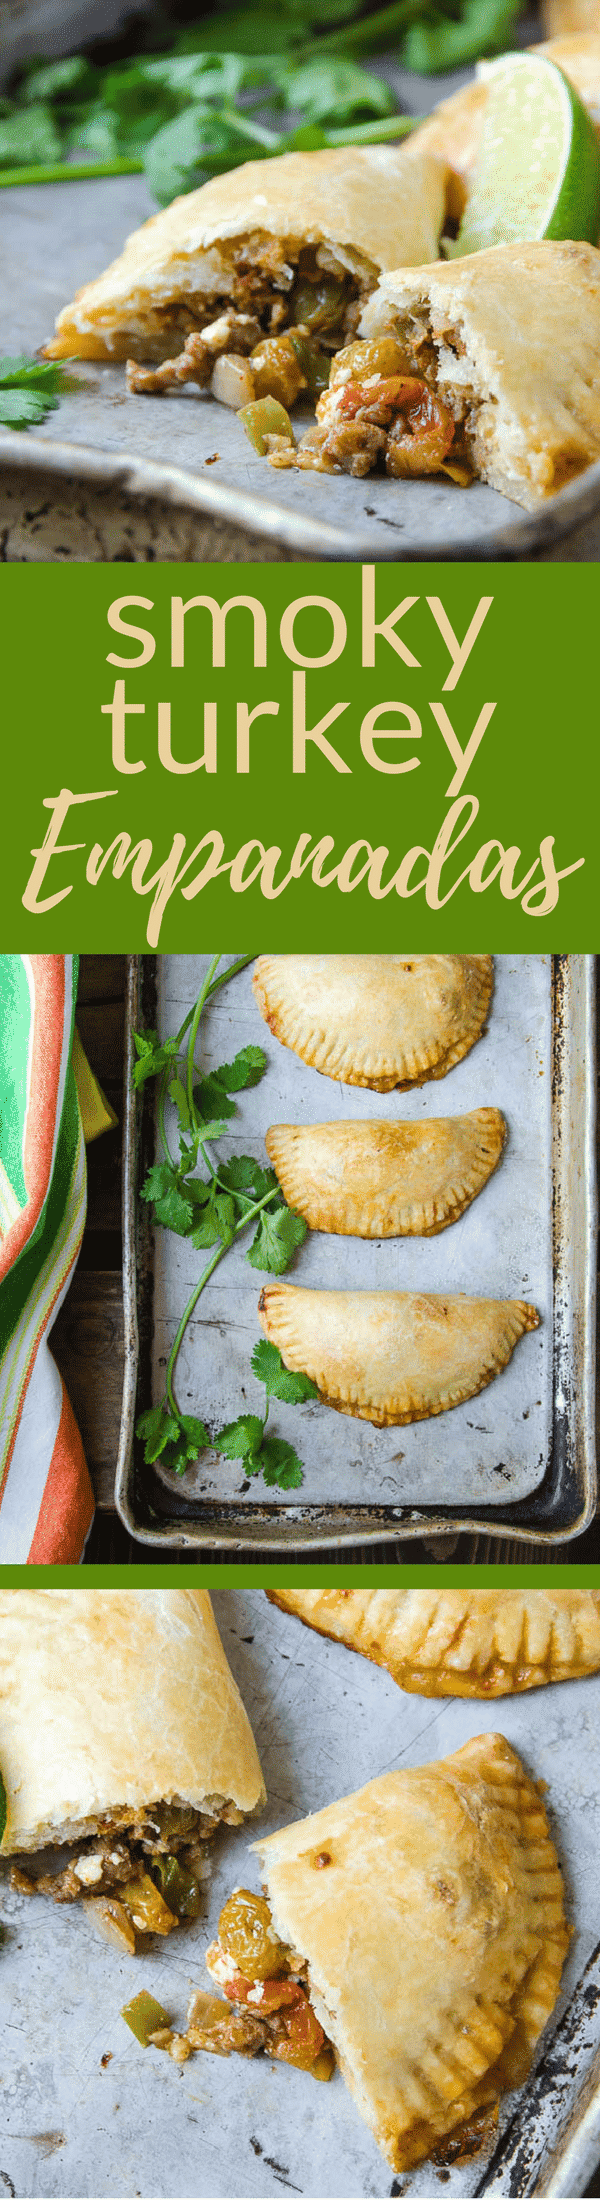 This Smoky Turkey Empanadas recipe is a great hand-held snack, perfect for tailgating. Make your own pastry or buy prepared empanada crusts in the freezer section. #empanada #handpie #meatpie #turkey #superbowlsnacks #tailgatingfood #tailgatingsnacks #groundturkey #pastry #empanadasrecipe #empanadarecipe #